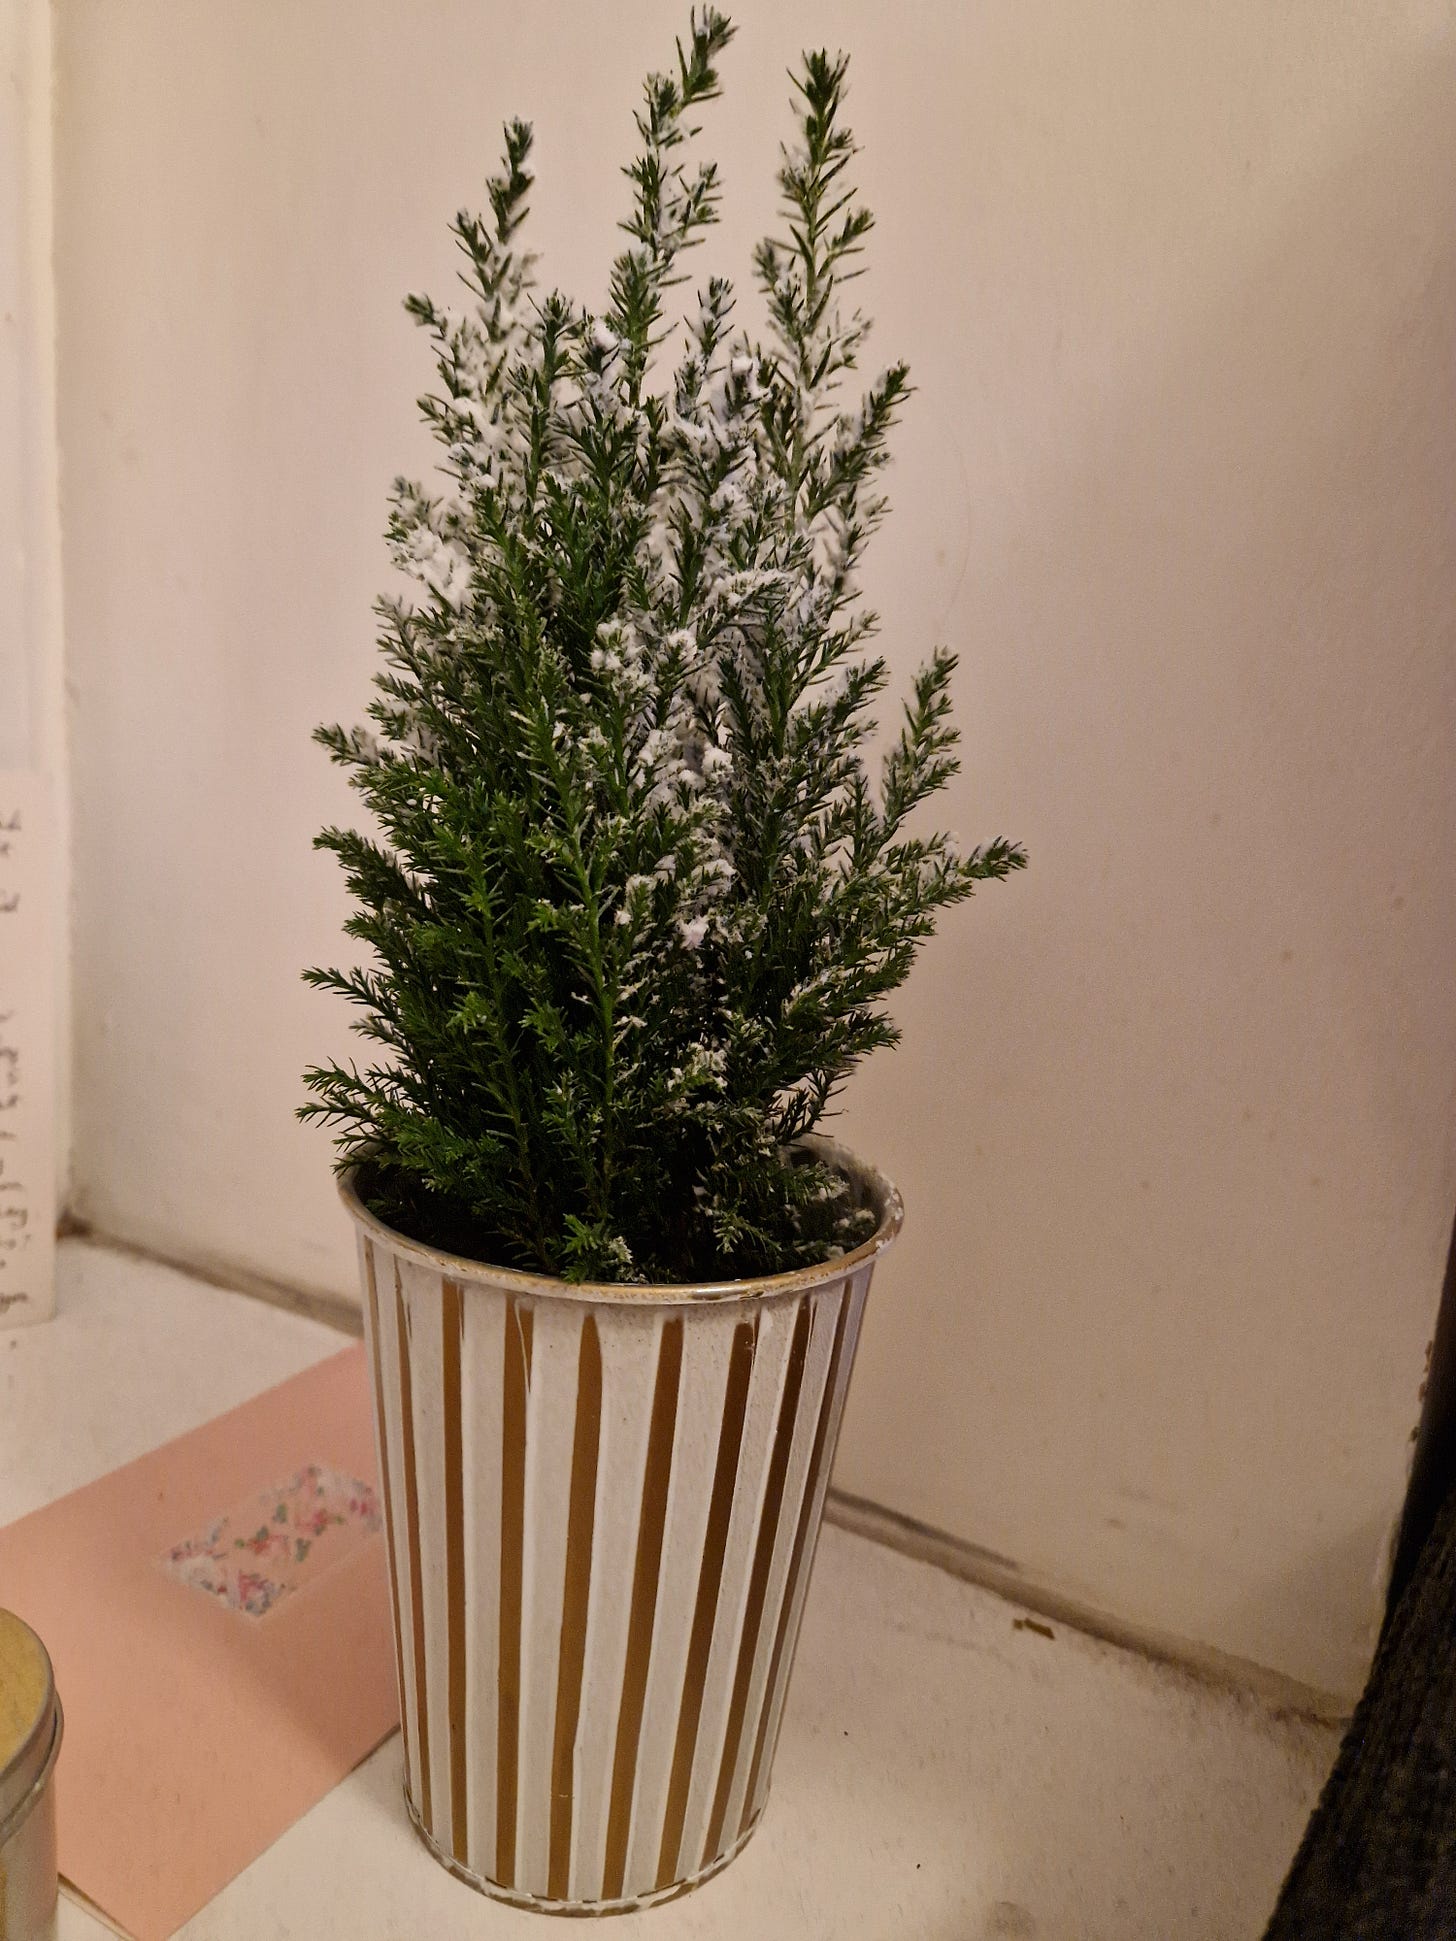 A small green Christmas tree with artificial snow on its branches in a white and gold ceramic plant pot on a window sill. 